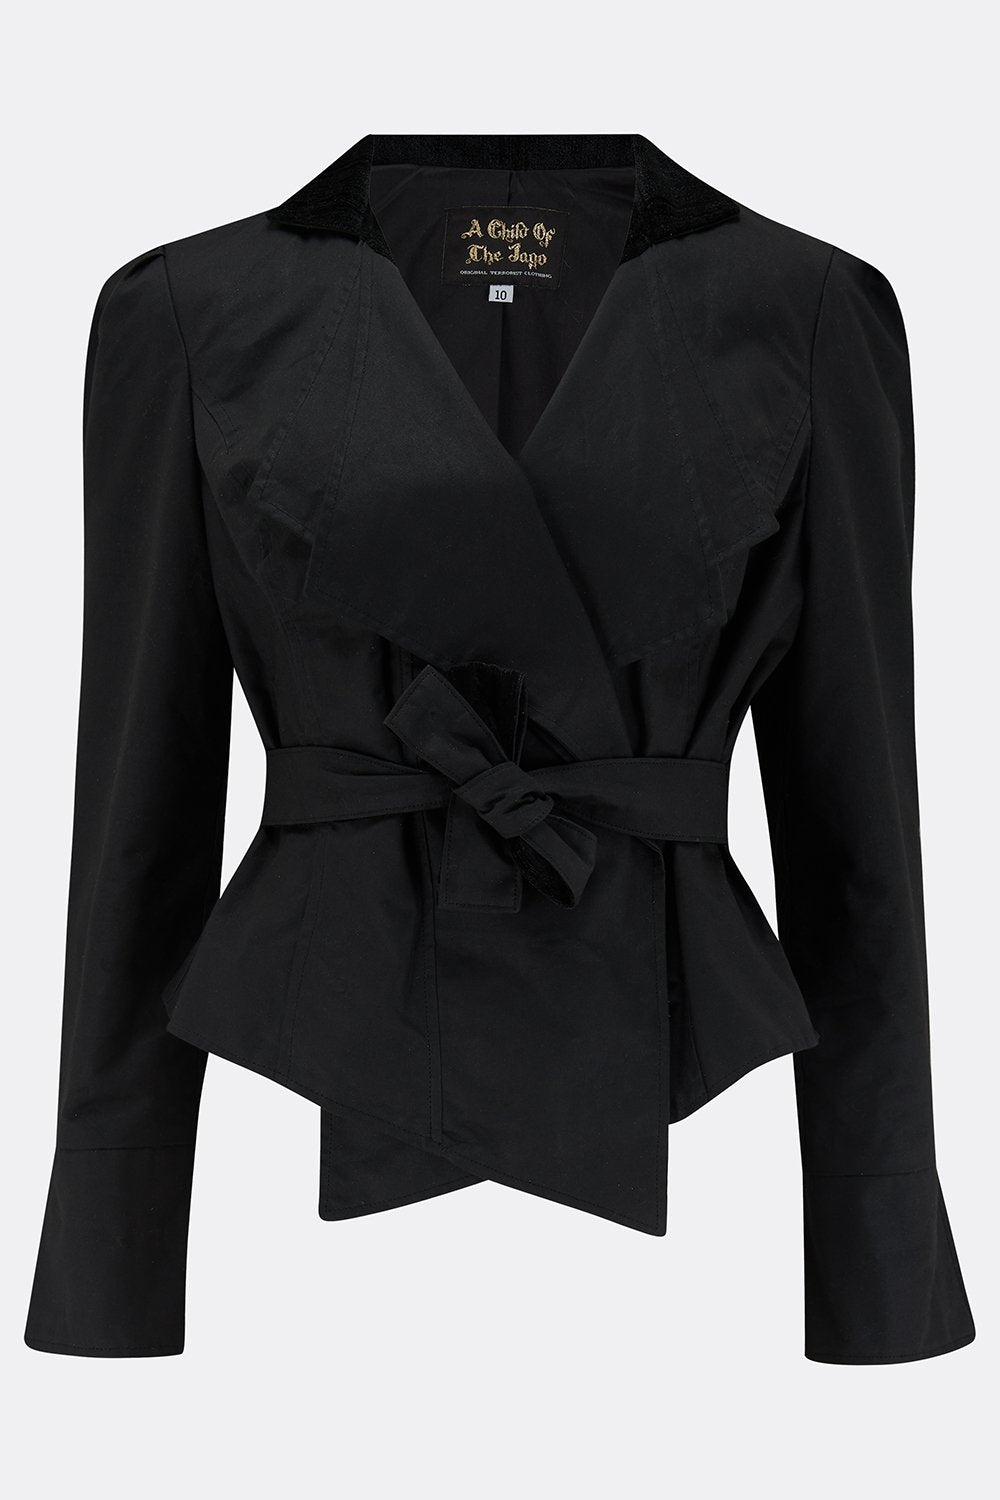 ARTEMIS JACKET IN BLACK WAX COTTON (made to order)-womenswear-A Child Of The Jago